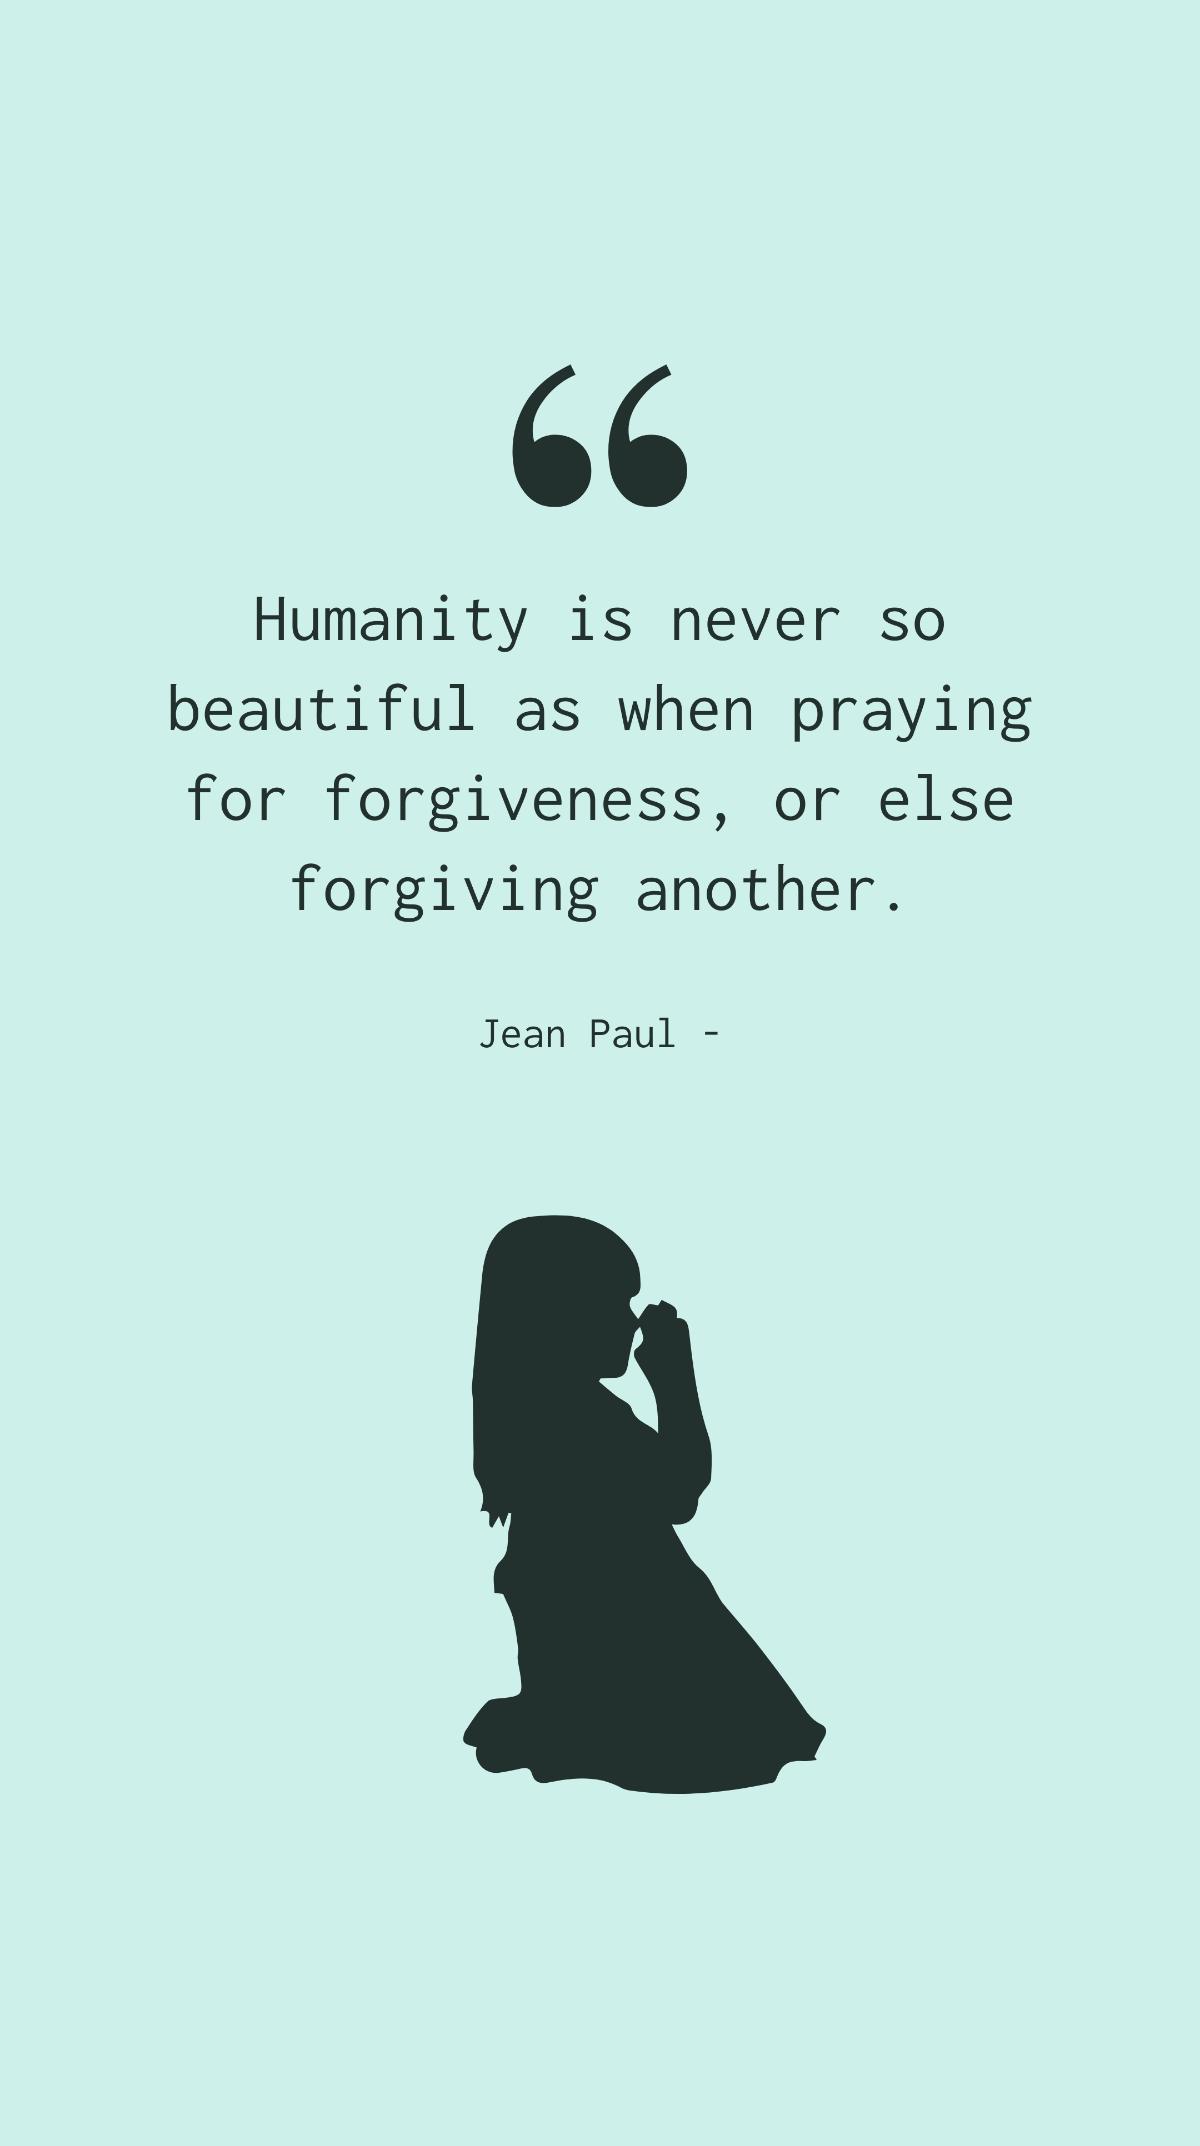 Jean Paul - Humanity is never so beautiful as when praying for forgiveness, or else forgiving another. Template